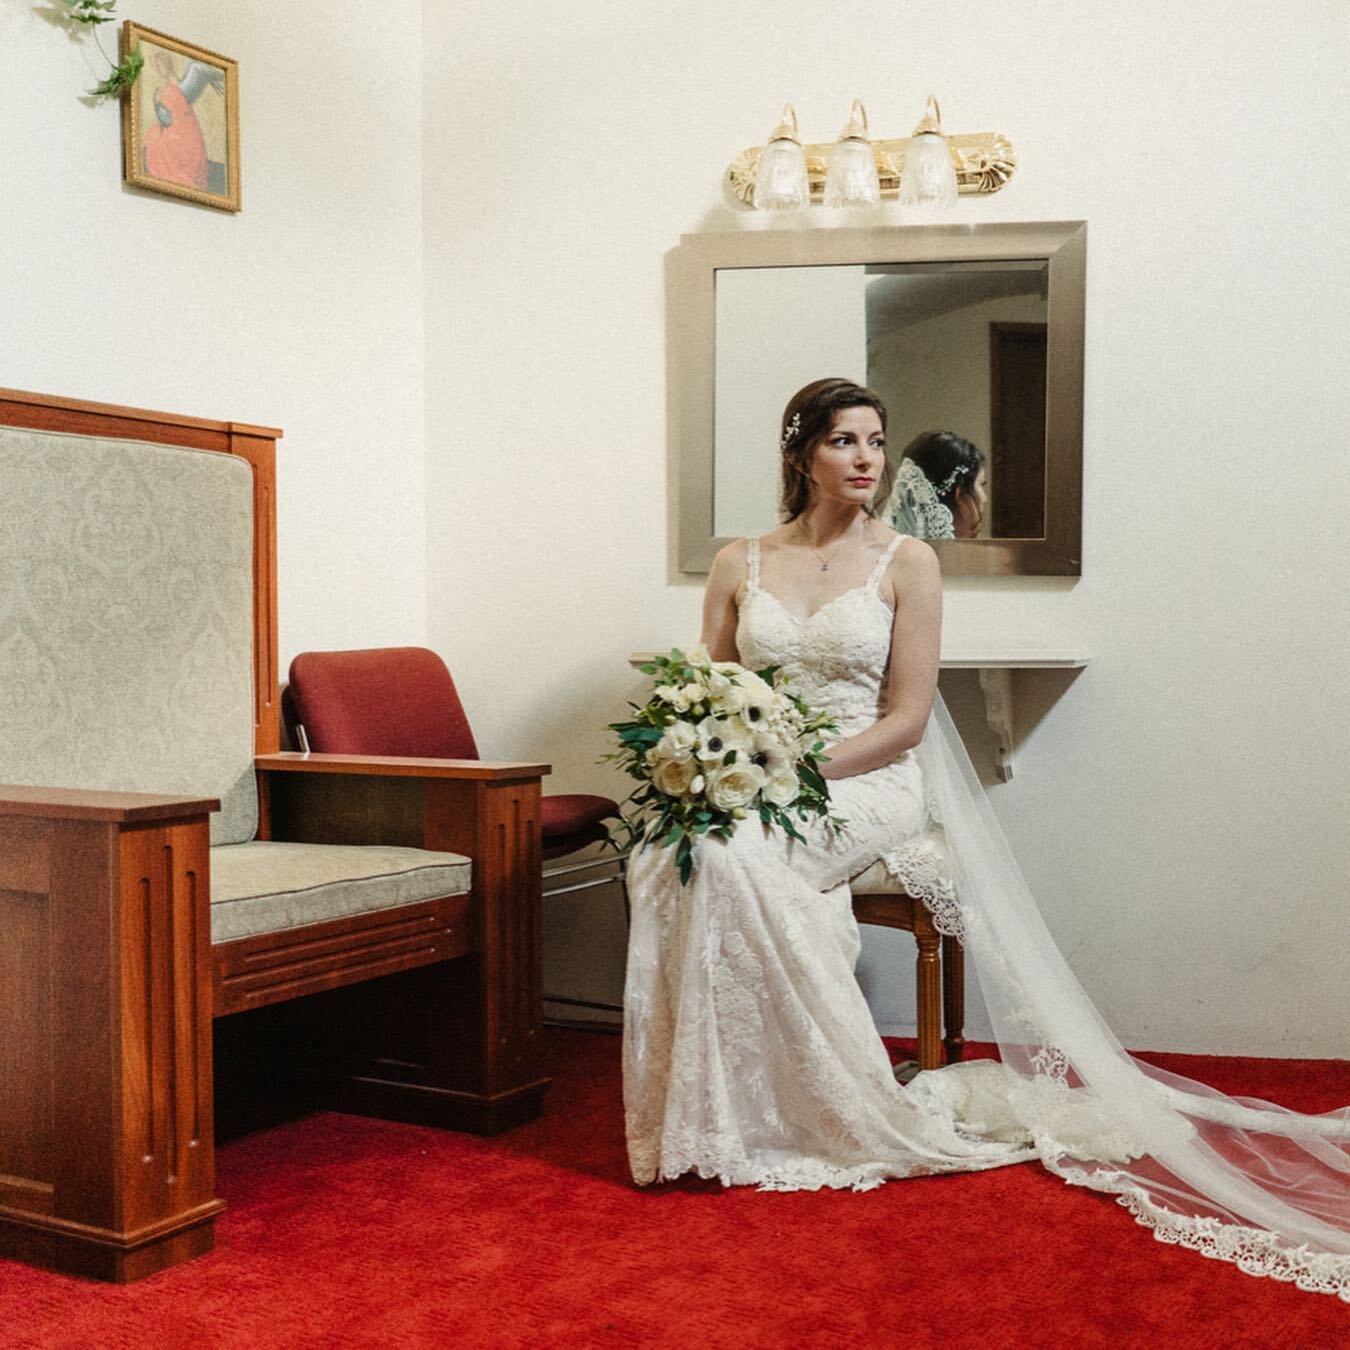 Some portraits of the bride before the big ceremony! From Alex and Ray&rsquo;s wedding last year when I 2nd shot with @makeetz !!